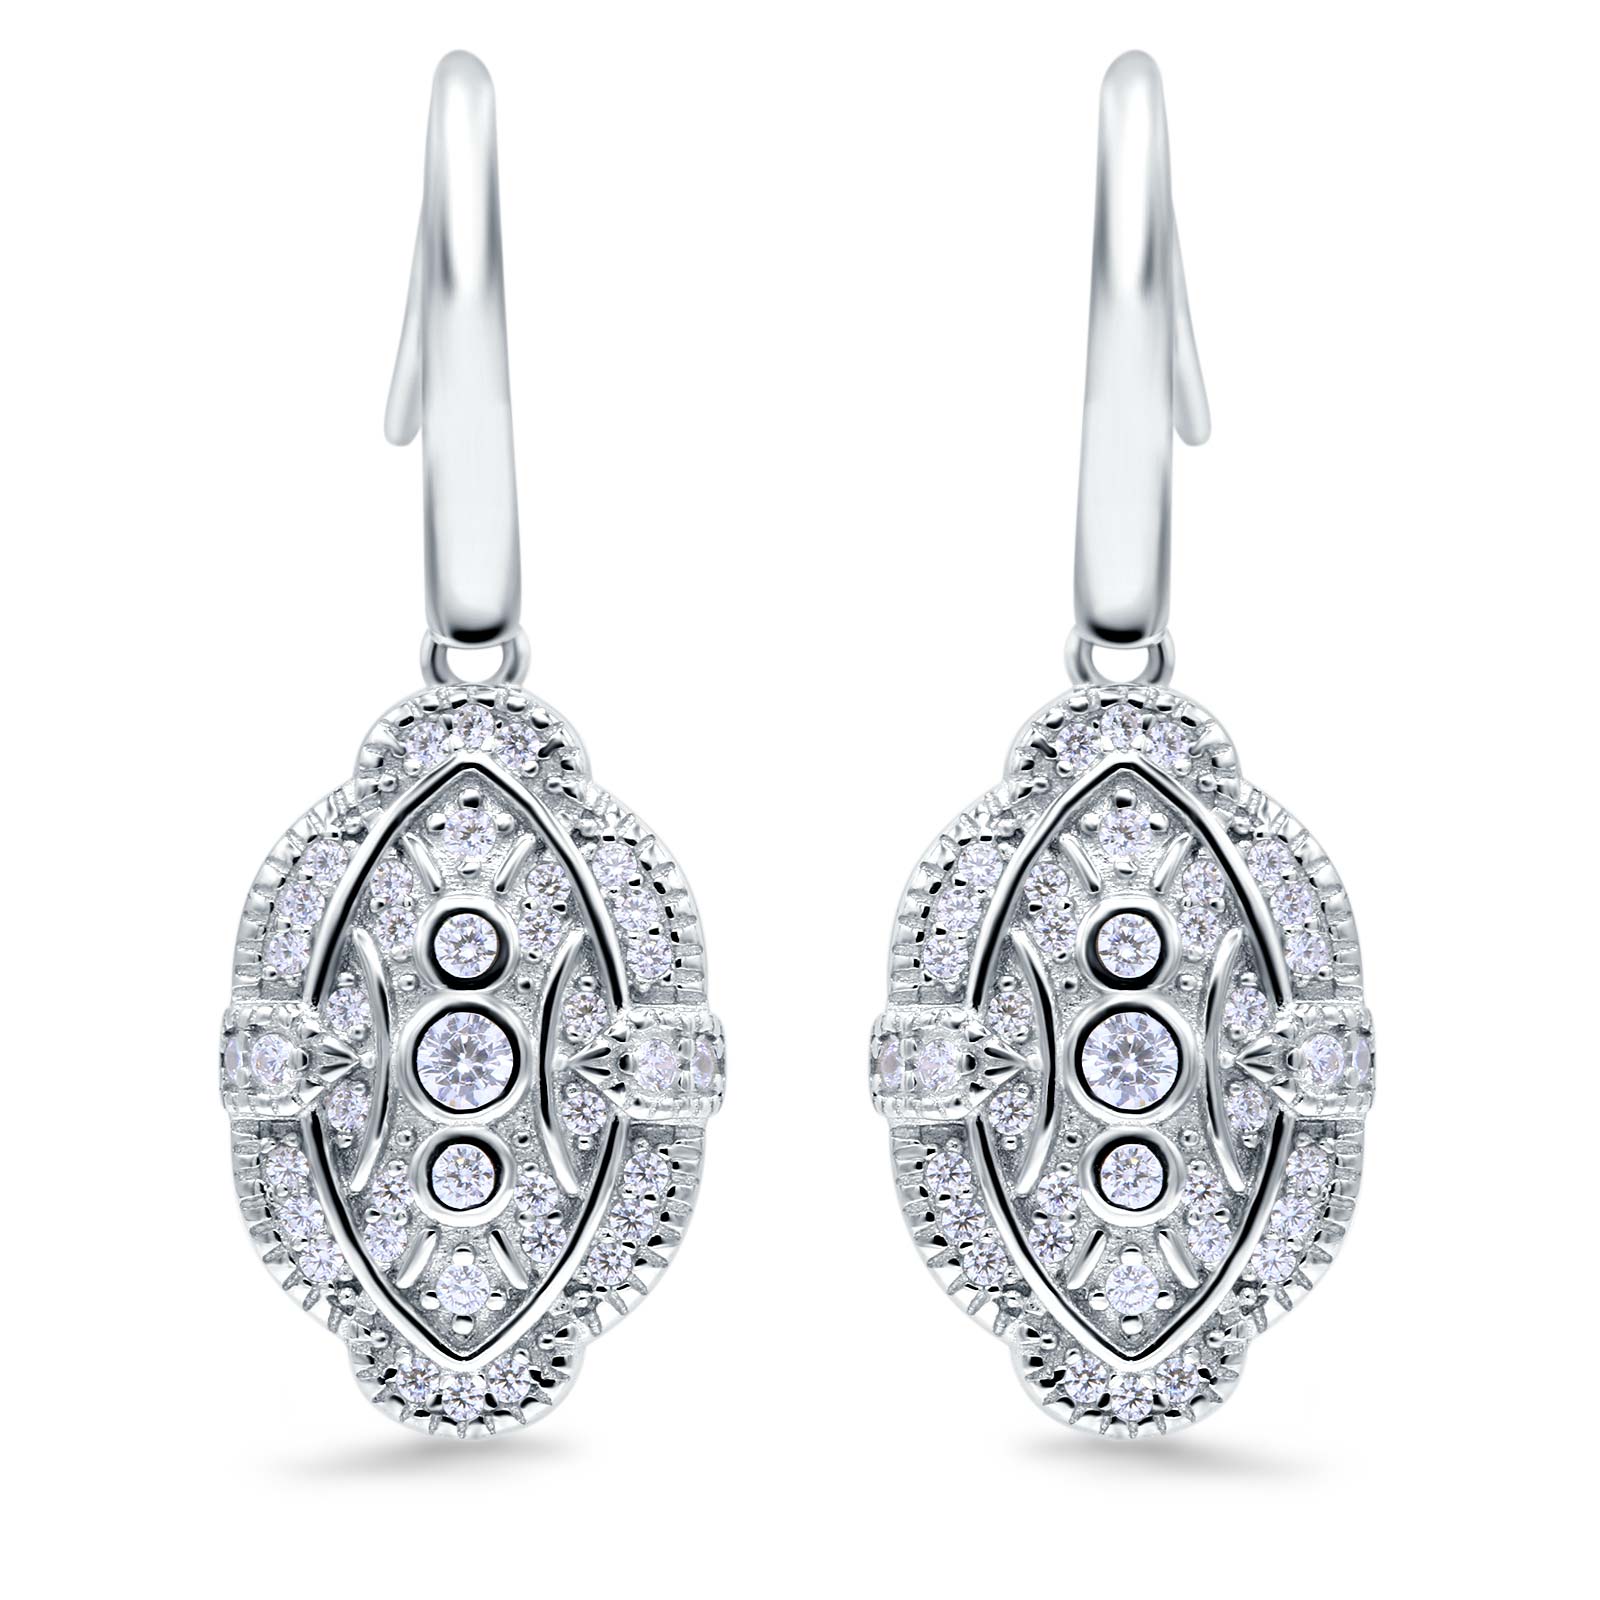 Drop Dangle Earrings Round Simulated Cubic Zirconia 925 Sterling Silver (18mm)